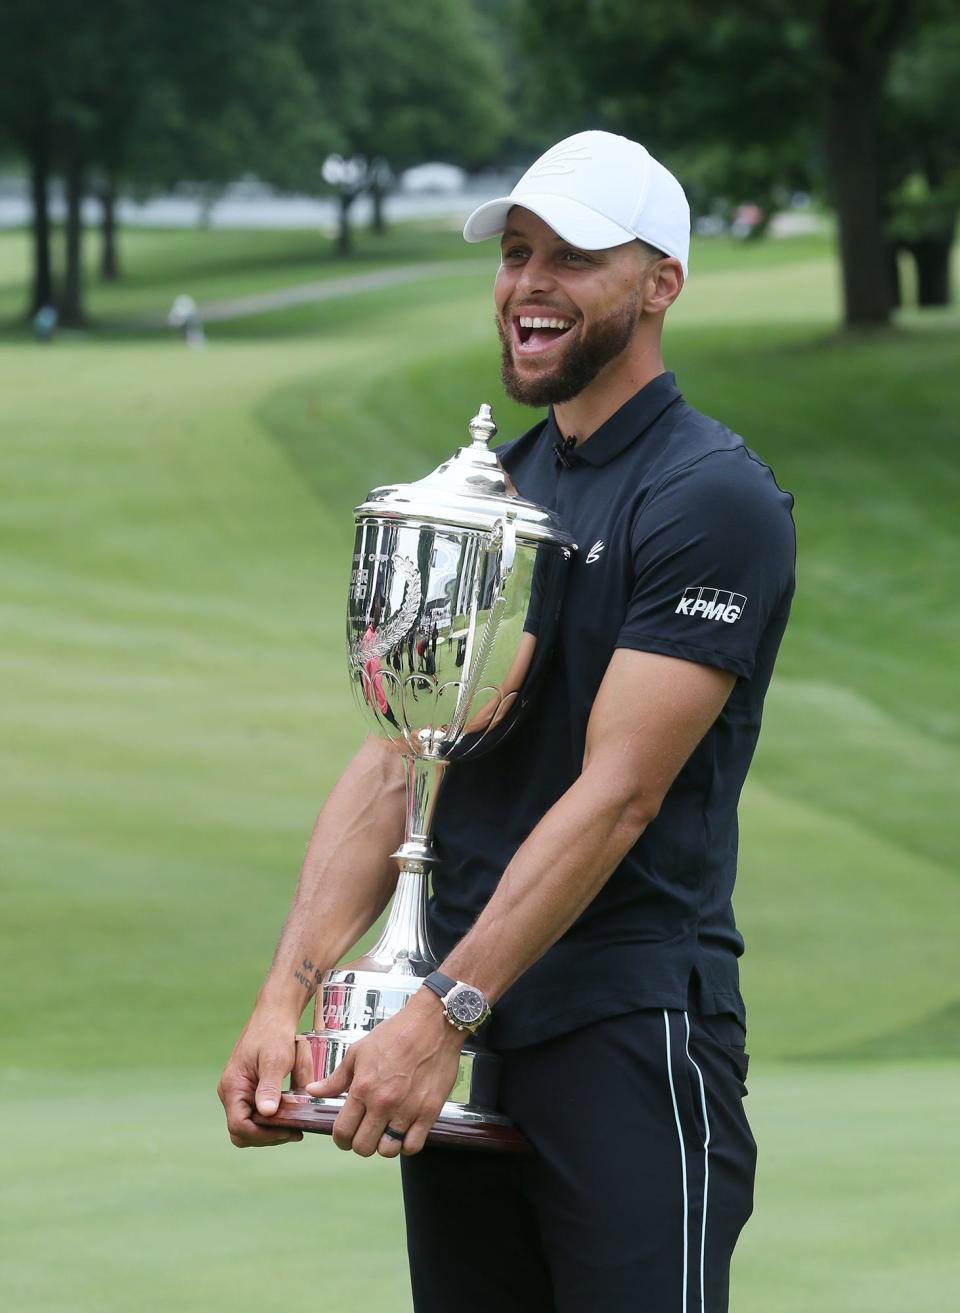 Stephen Curry holds the Underrated Golf tournament trophy as workers mover the trophy stand on the 18th green on the South Course at Firestone Country Club in Akron.